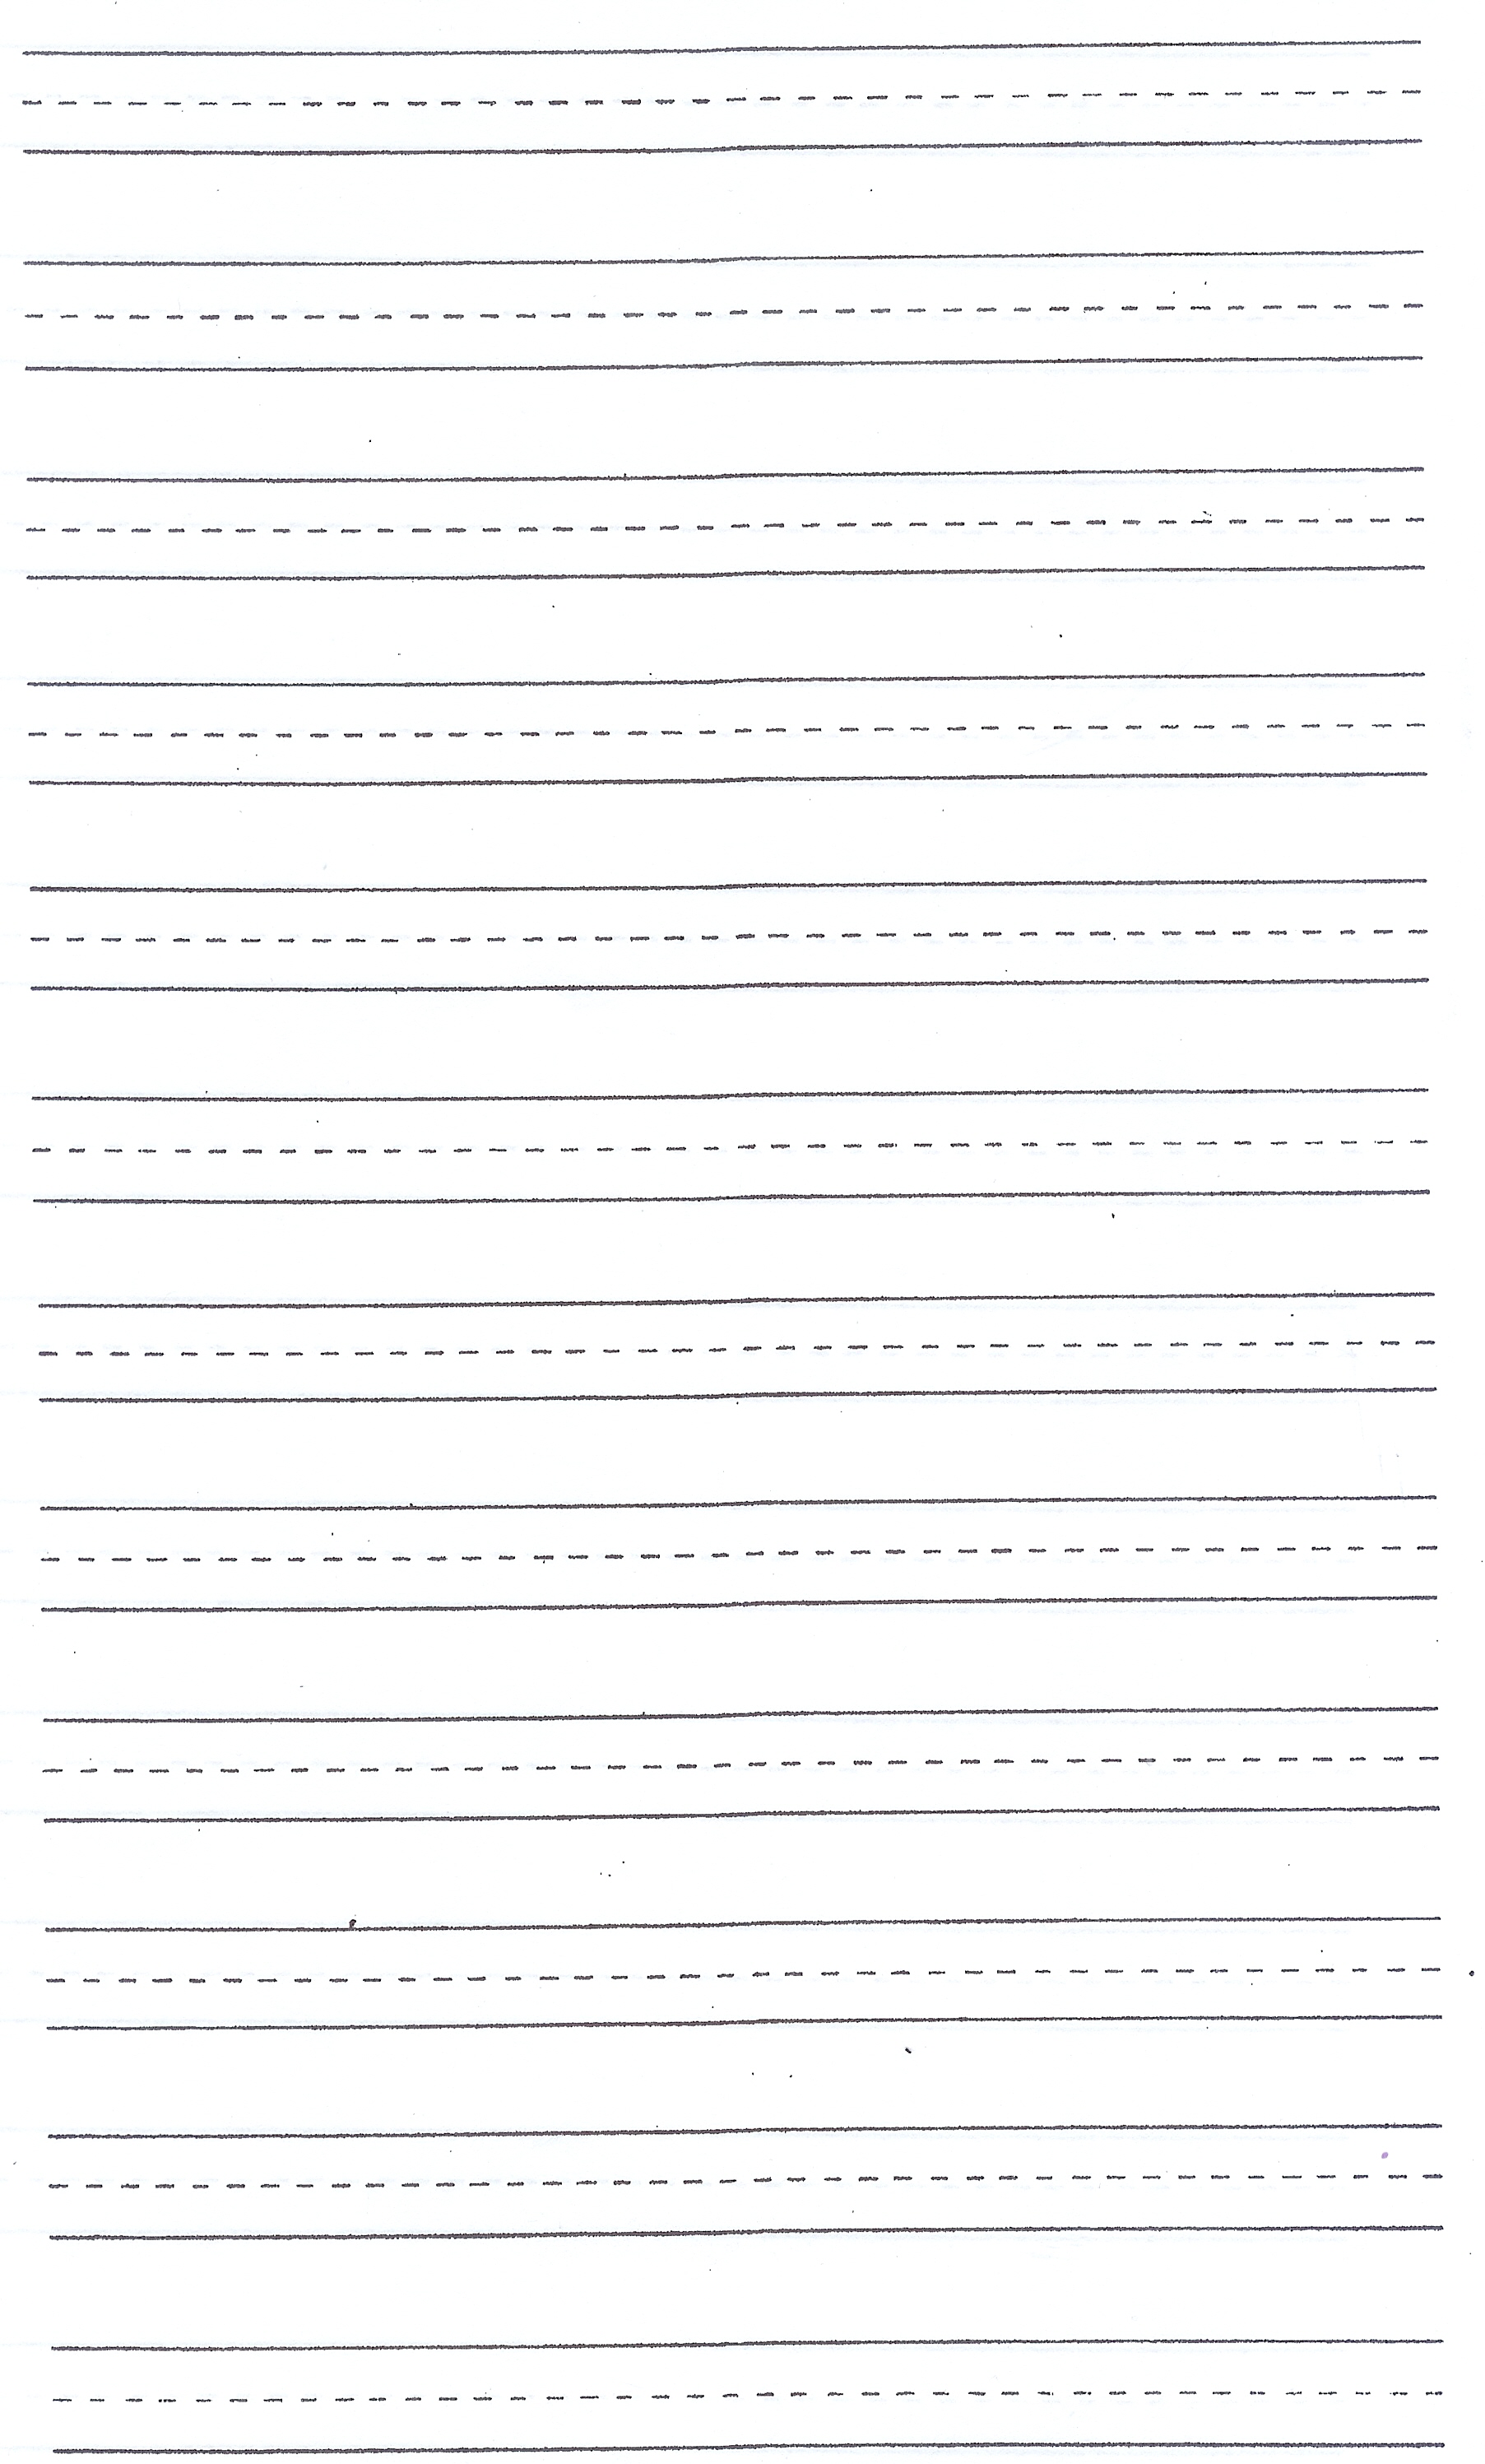 free-writing-paper-for-first-grade-writing-service-paper-templates